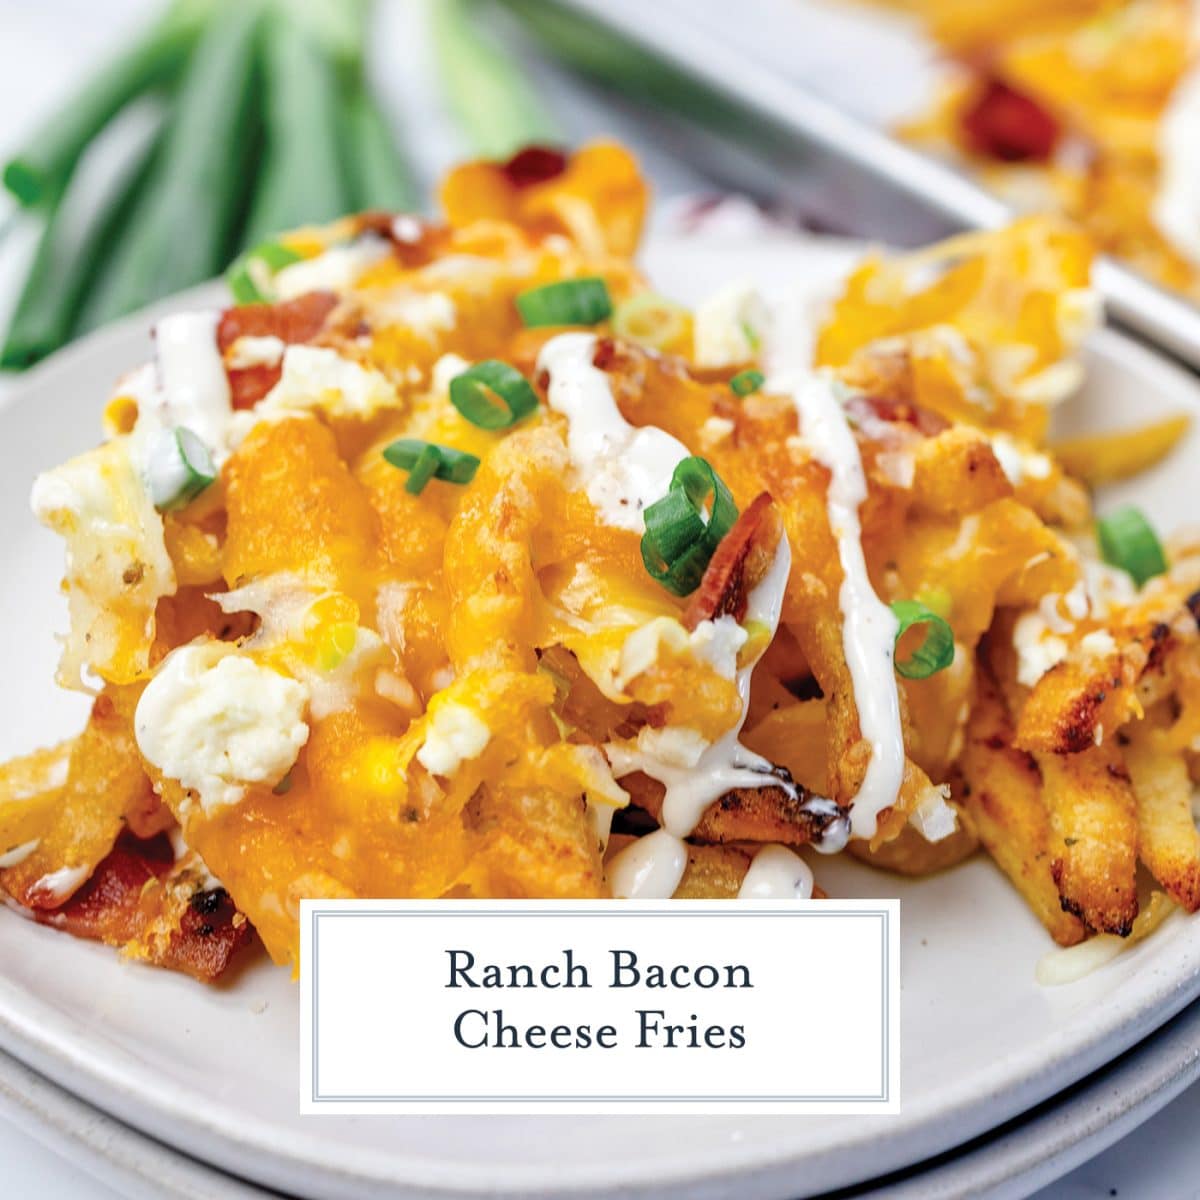 https://www.savoryexperiments.com/wp-content/uploads/2022/10/Ranch-Bacon-Cheese-Fries-FB-1200x1200.jpg